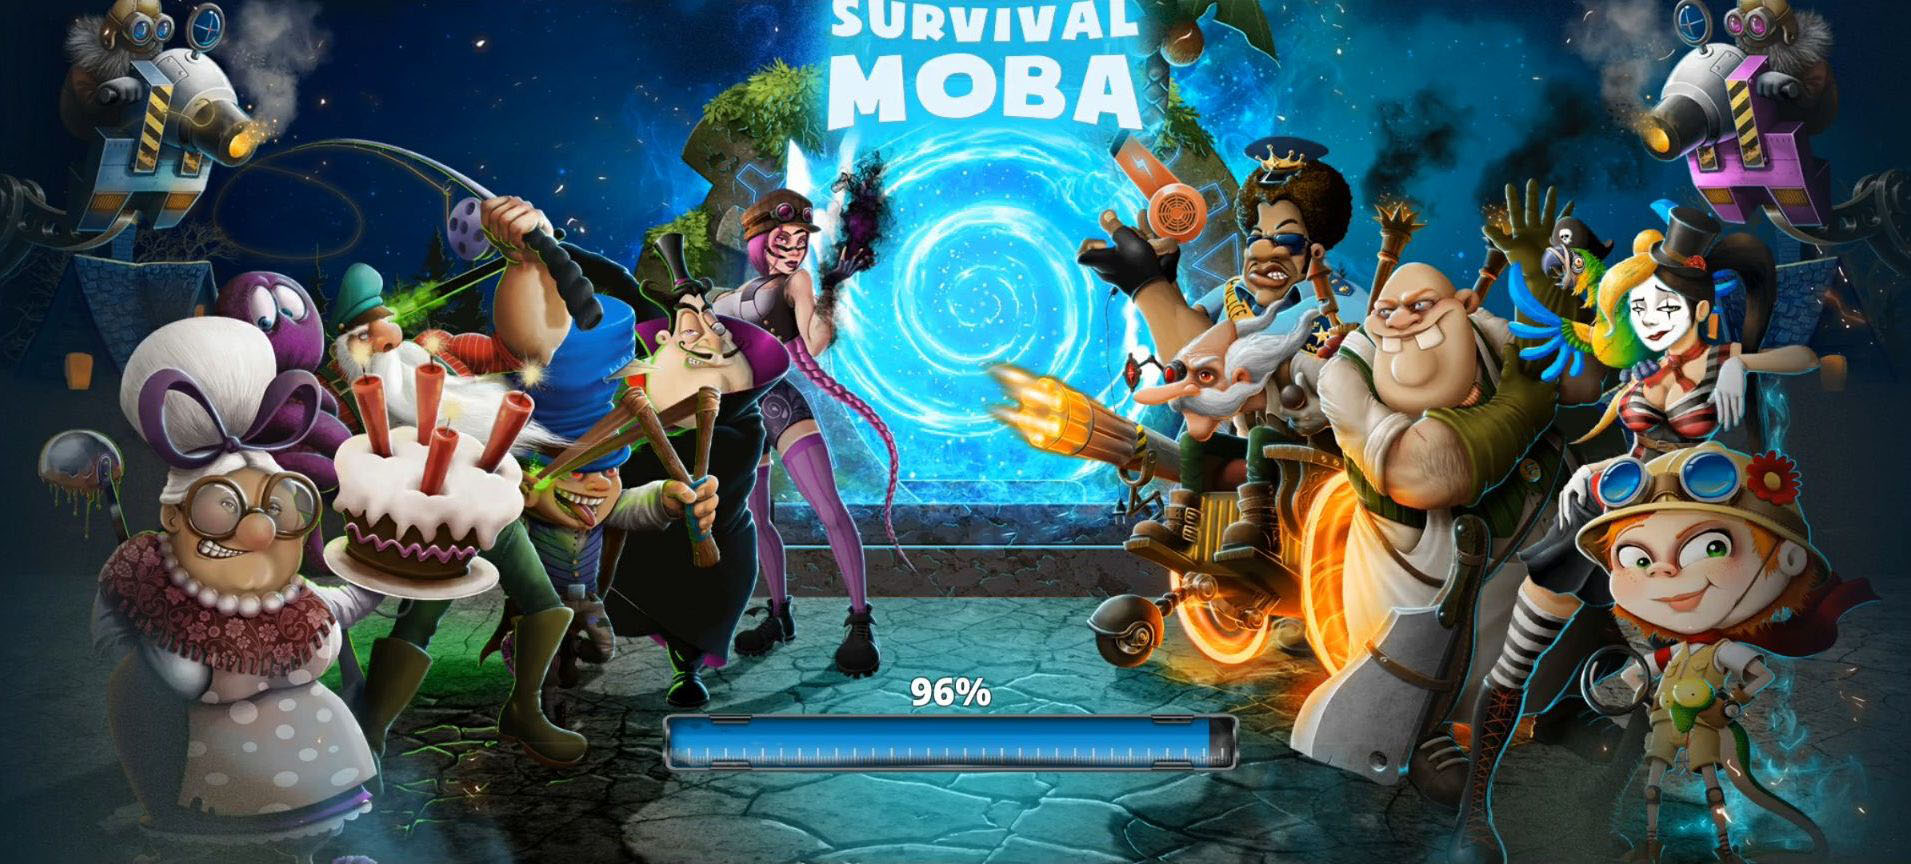 Full version of Android Battle arena game apk Survival MOBA for tablet and phone.